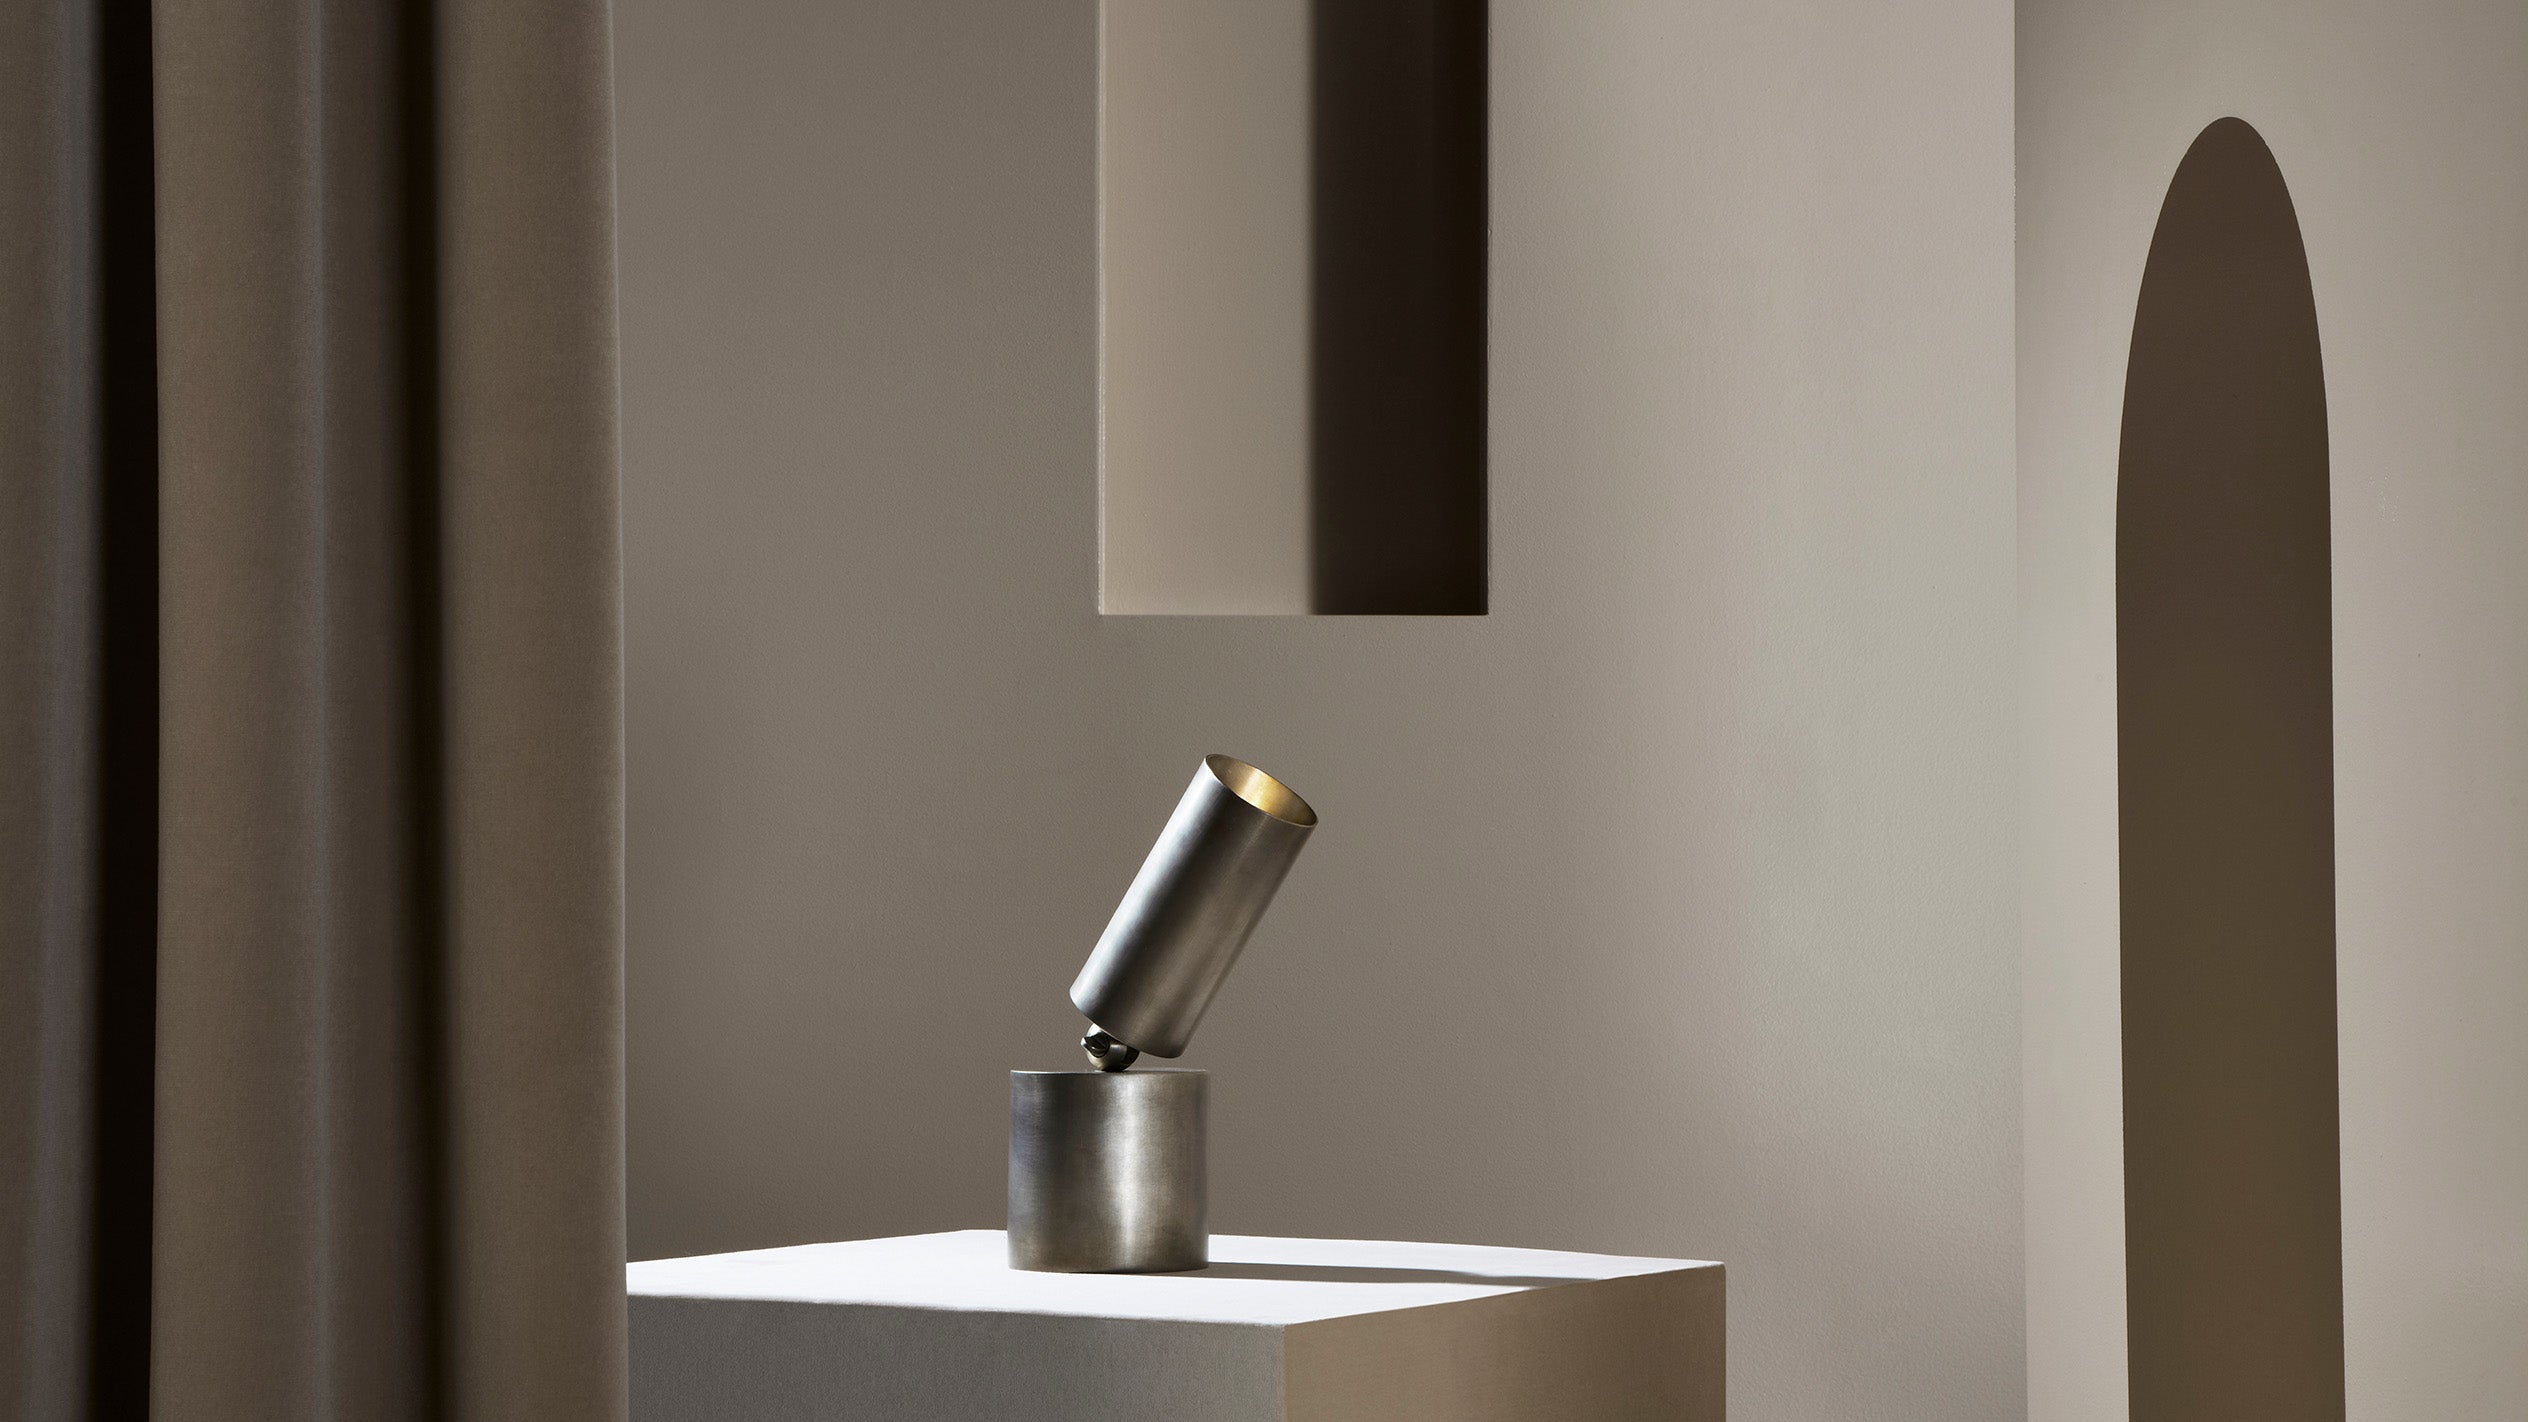 CYLINDER directional table lamp in Tarnished Silver finish. 